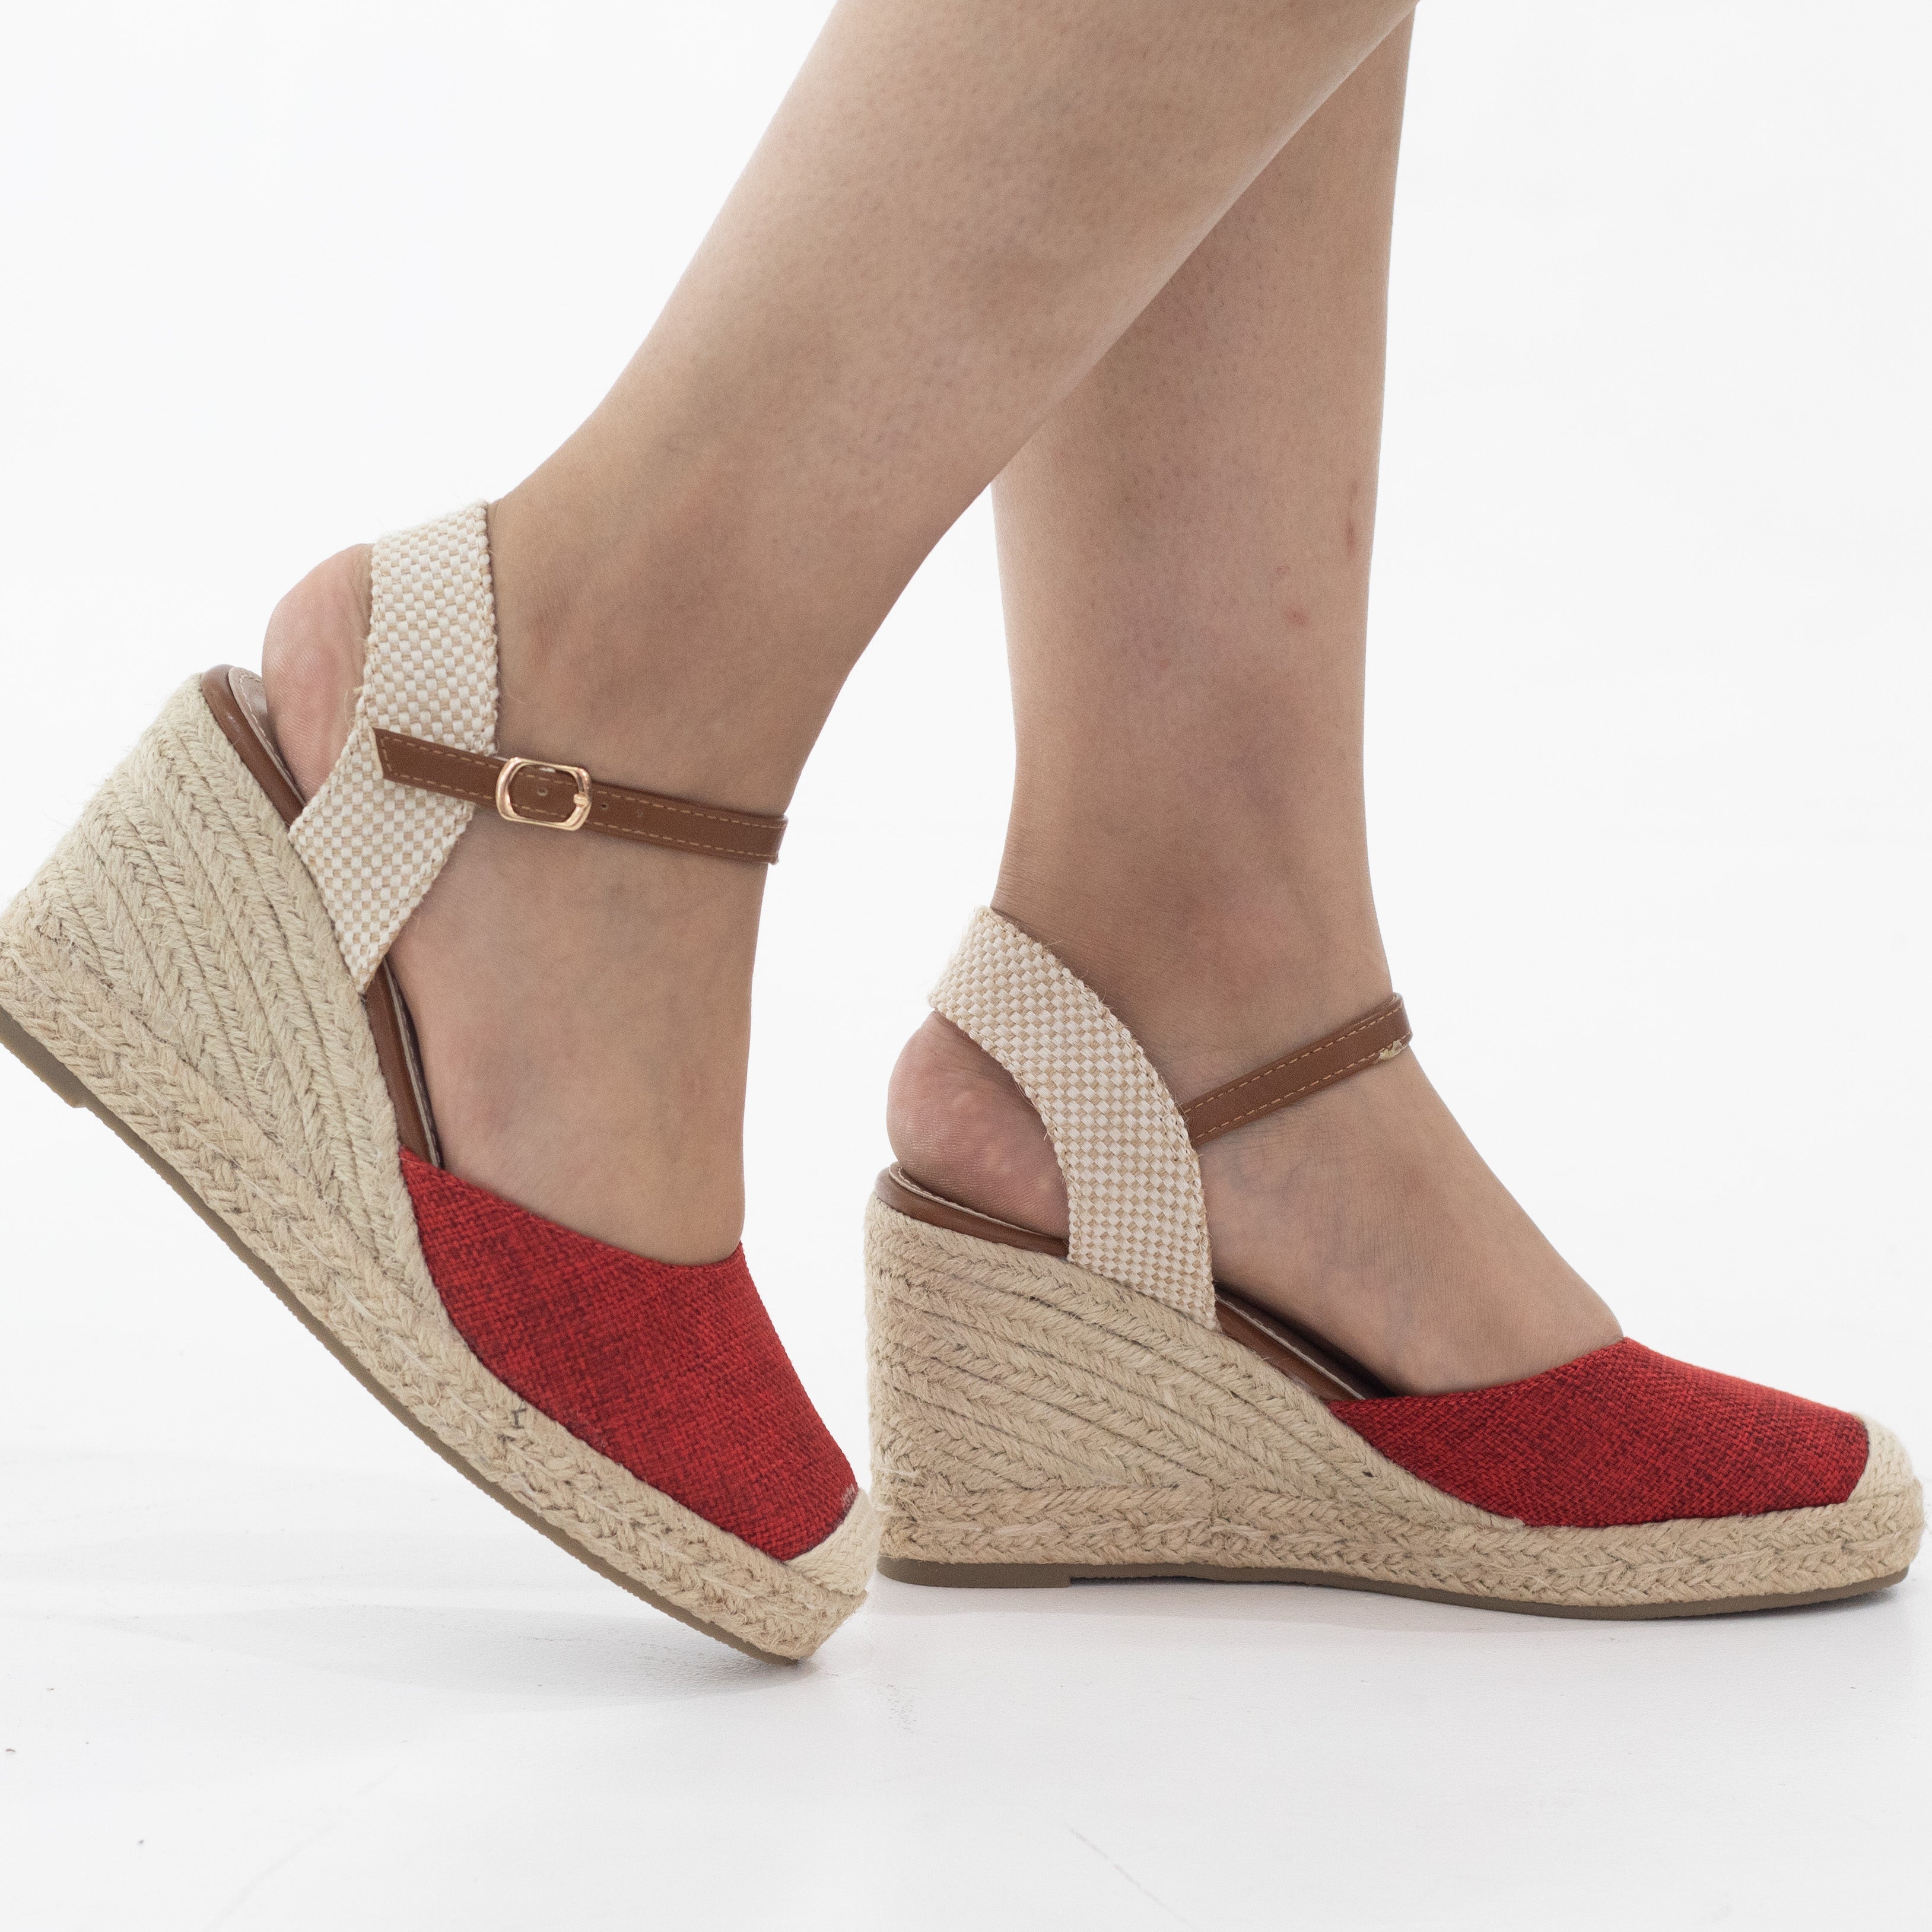 Hitomi espadrille woven closed toe 8cm wedge heel sandals red